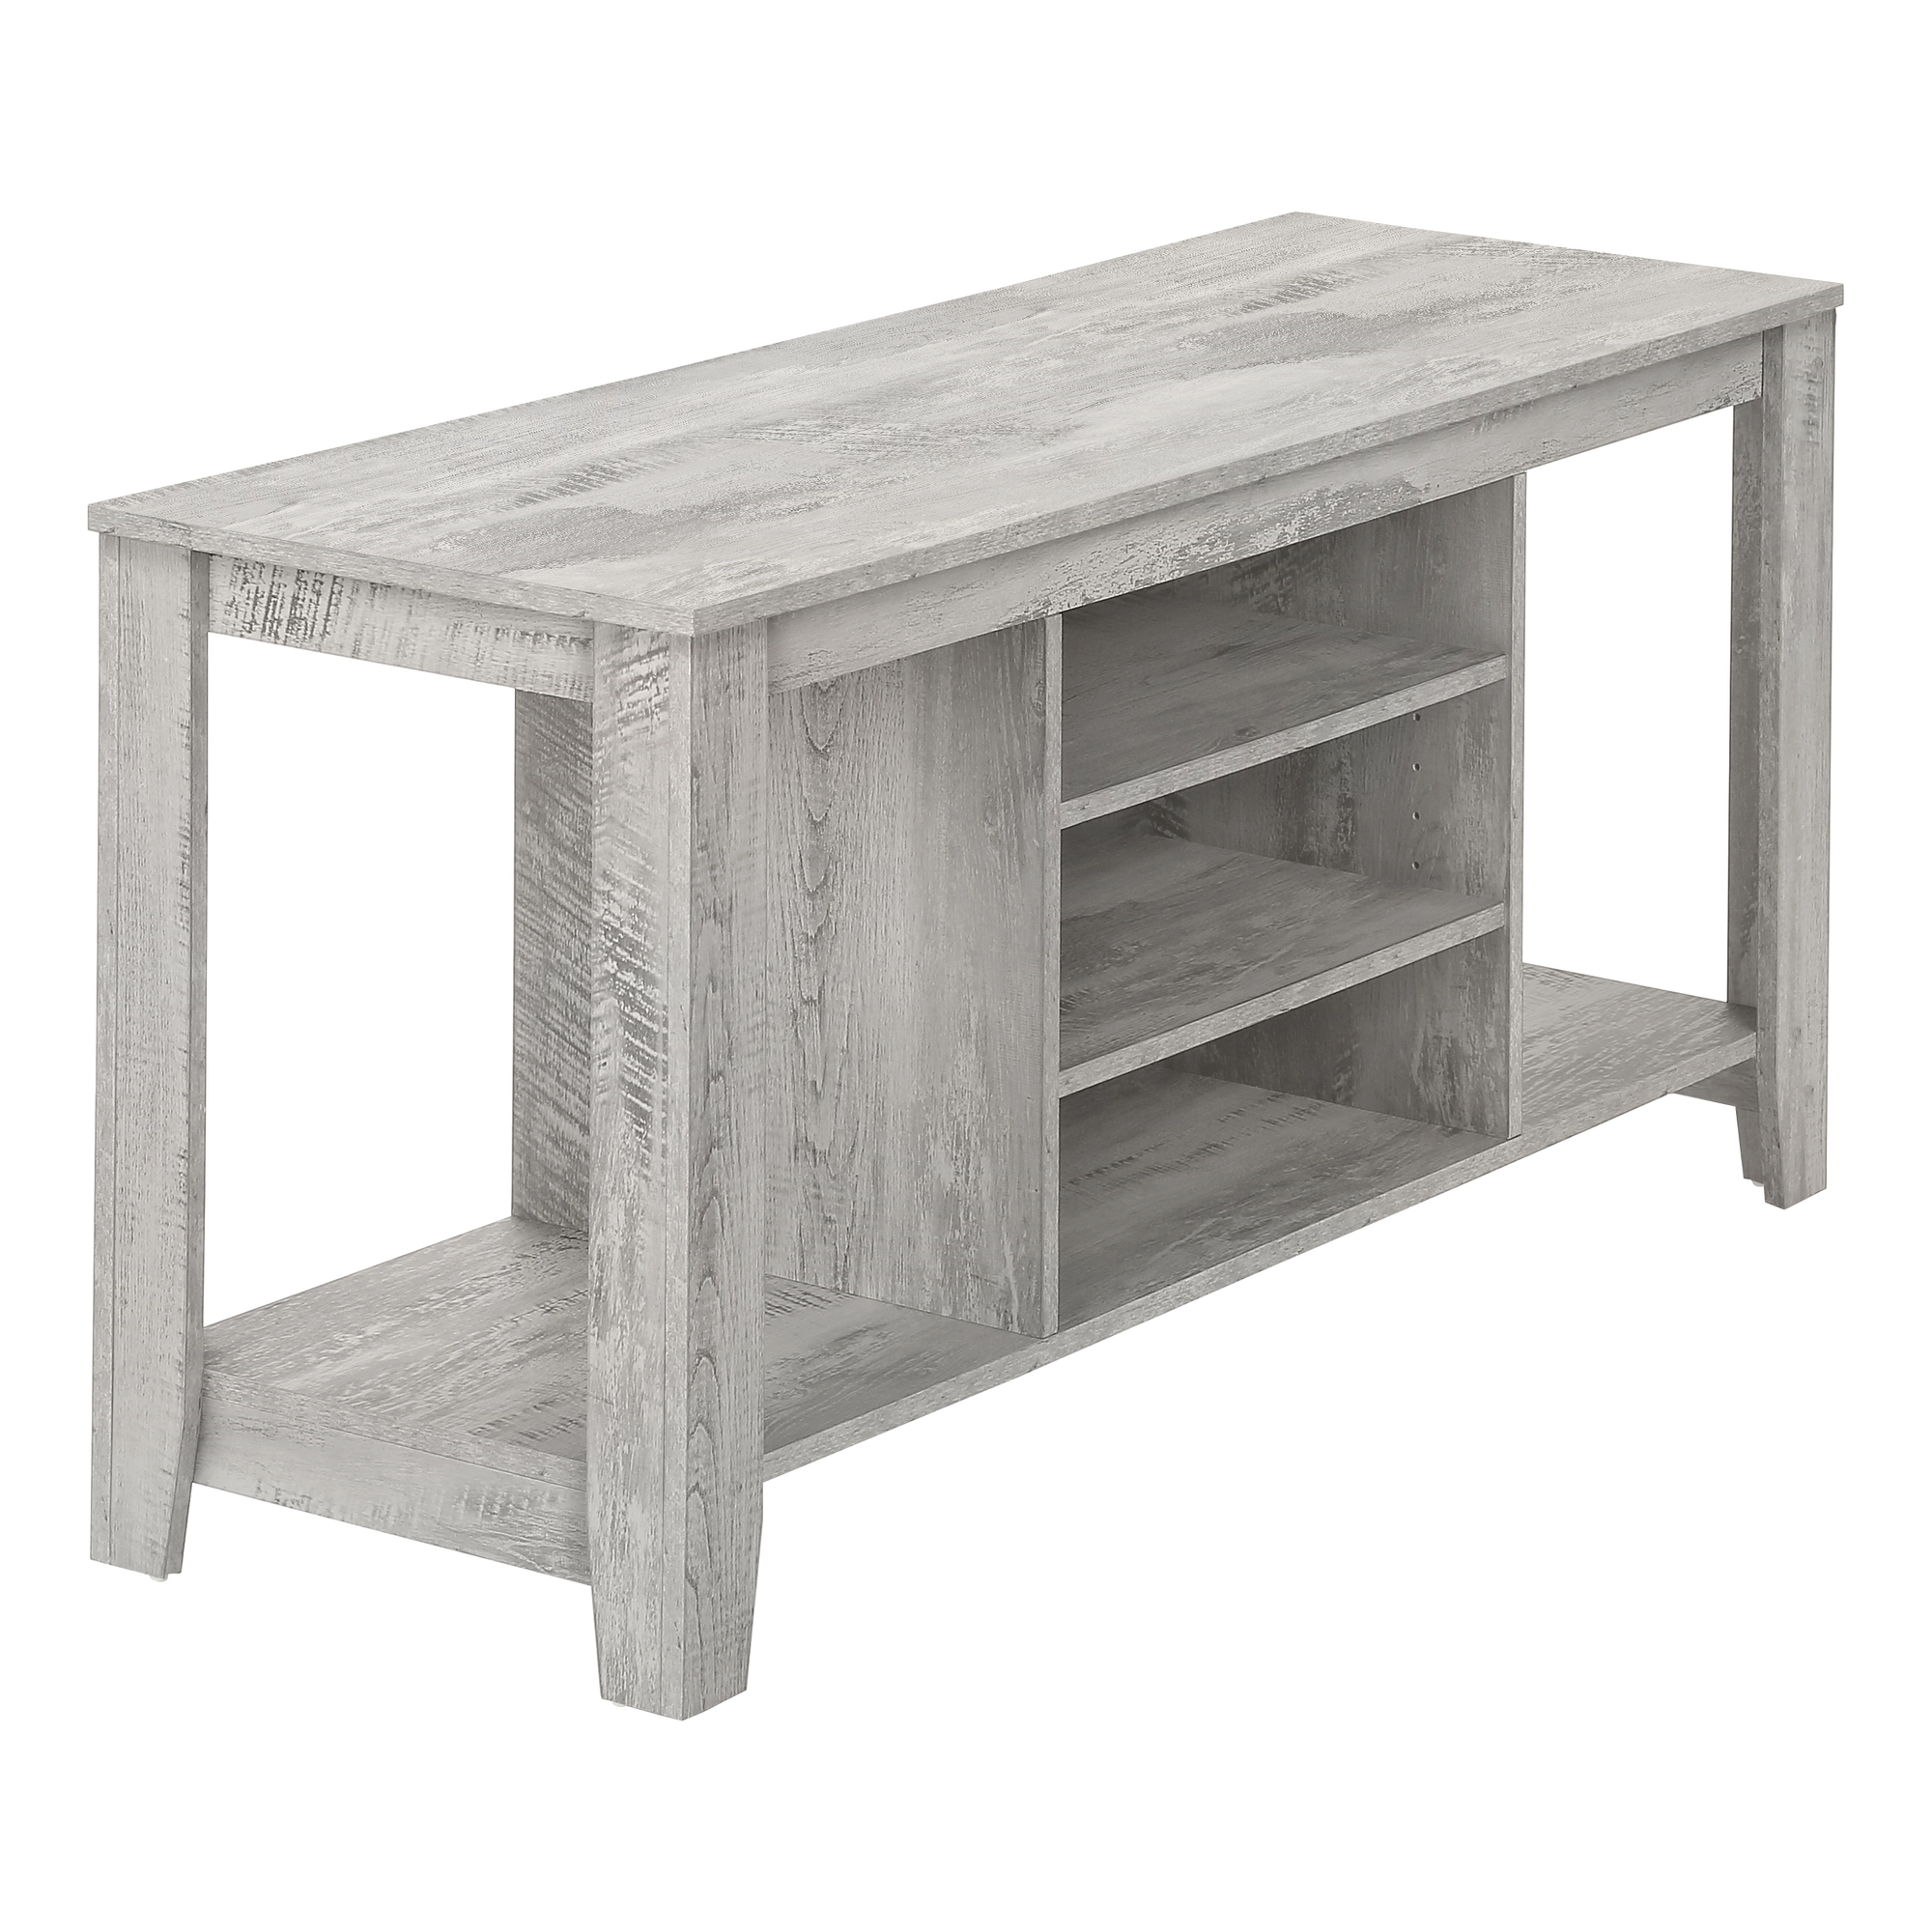 TV STAND - 48"L / INDUSTRIAL GREY